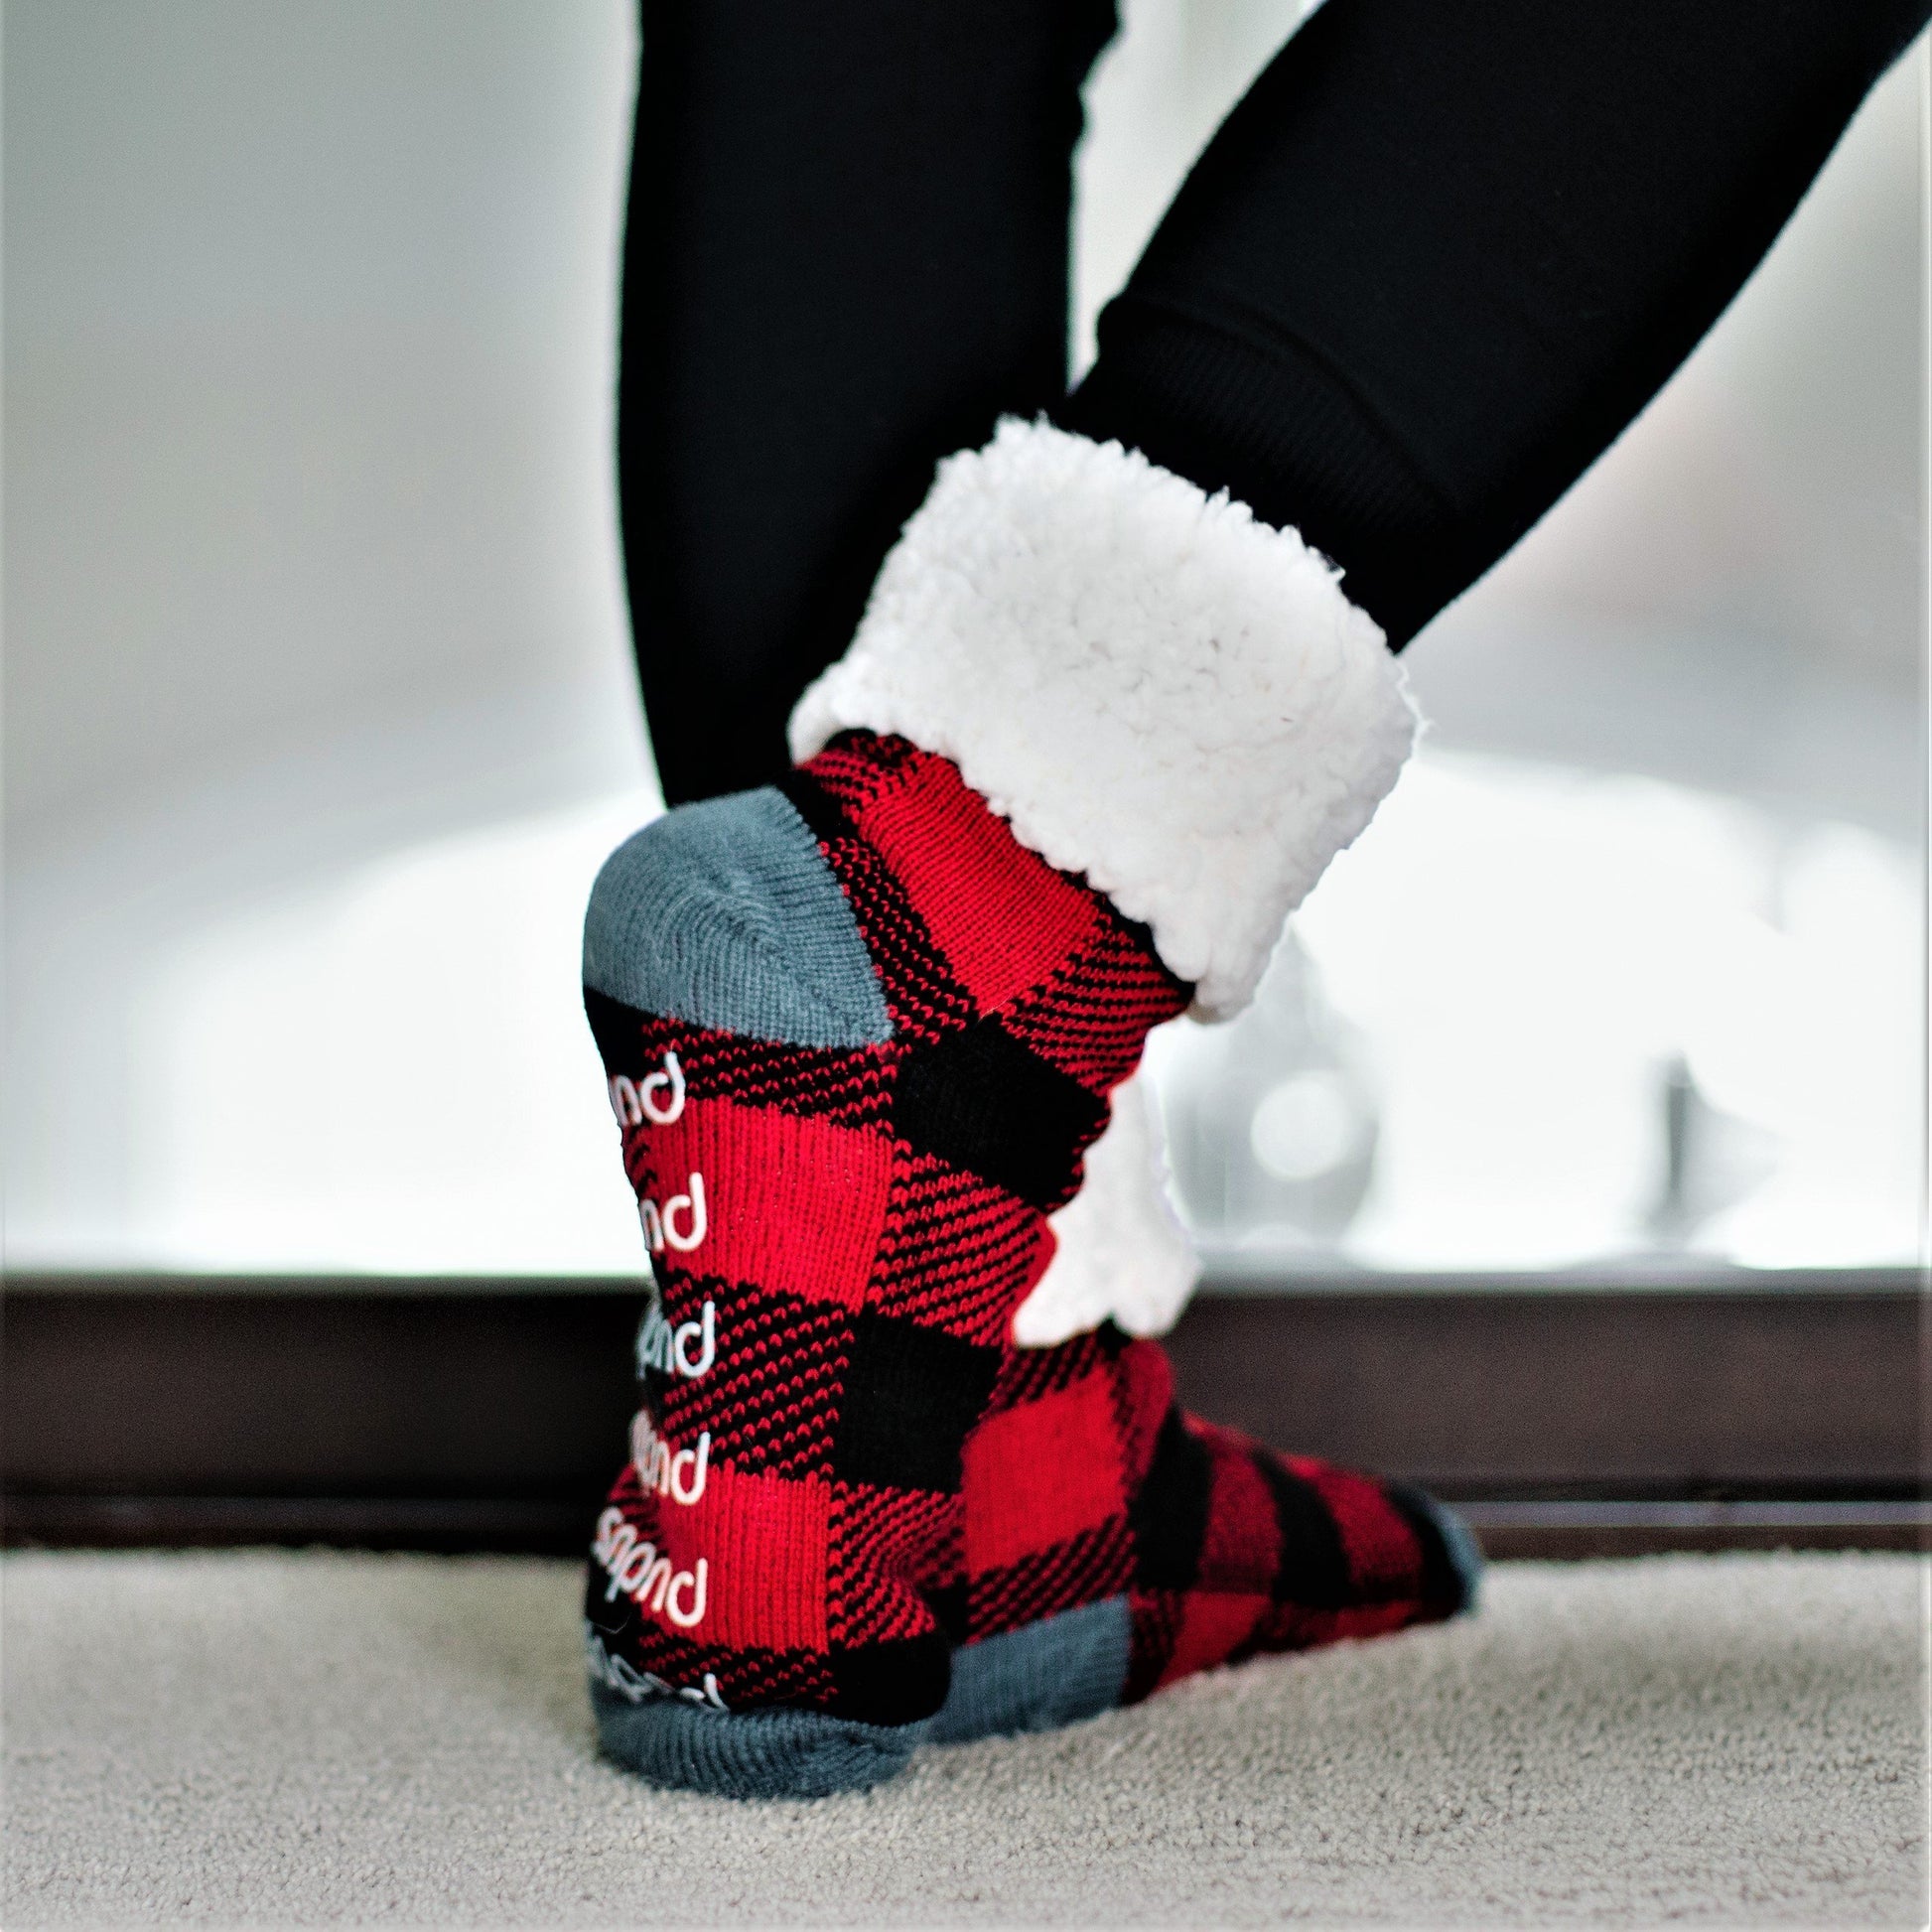 Pudus Cozy Winter Slipper Socks for Women and Men with Non-Slip Grippers and Faux Fur Sherpa Fleece - Adult Regular Fuzzy Regular and Large Socks Red Lumberjack - Classic Slipper Sock